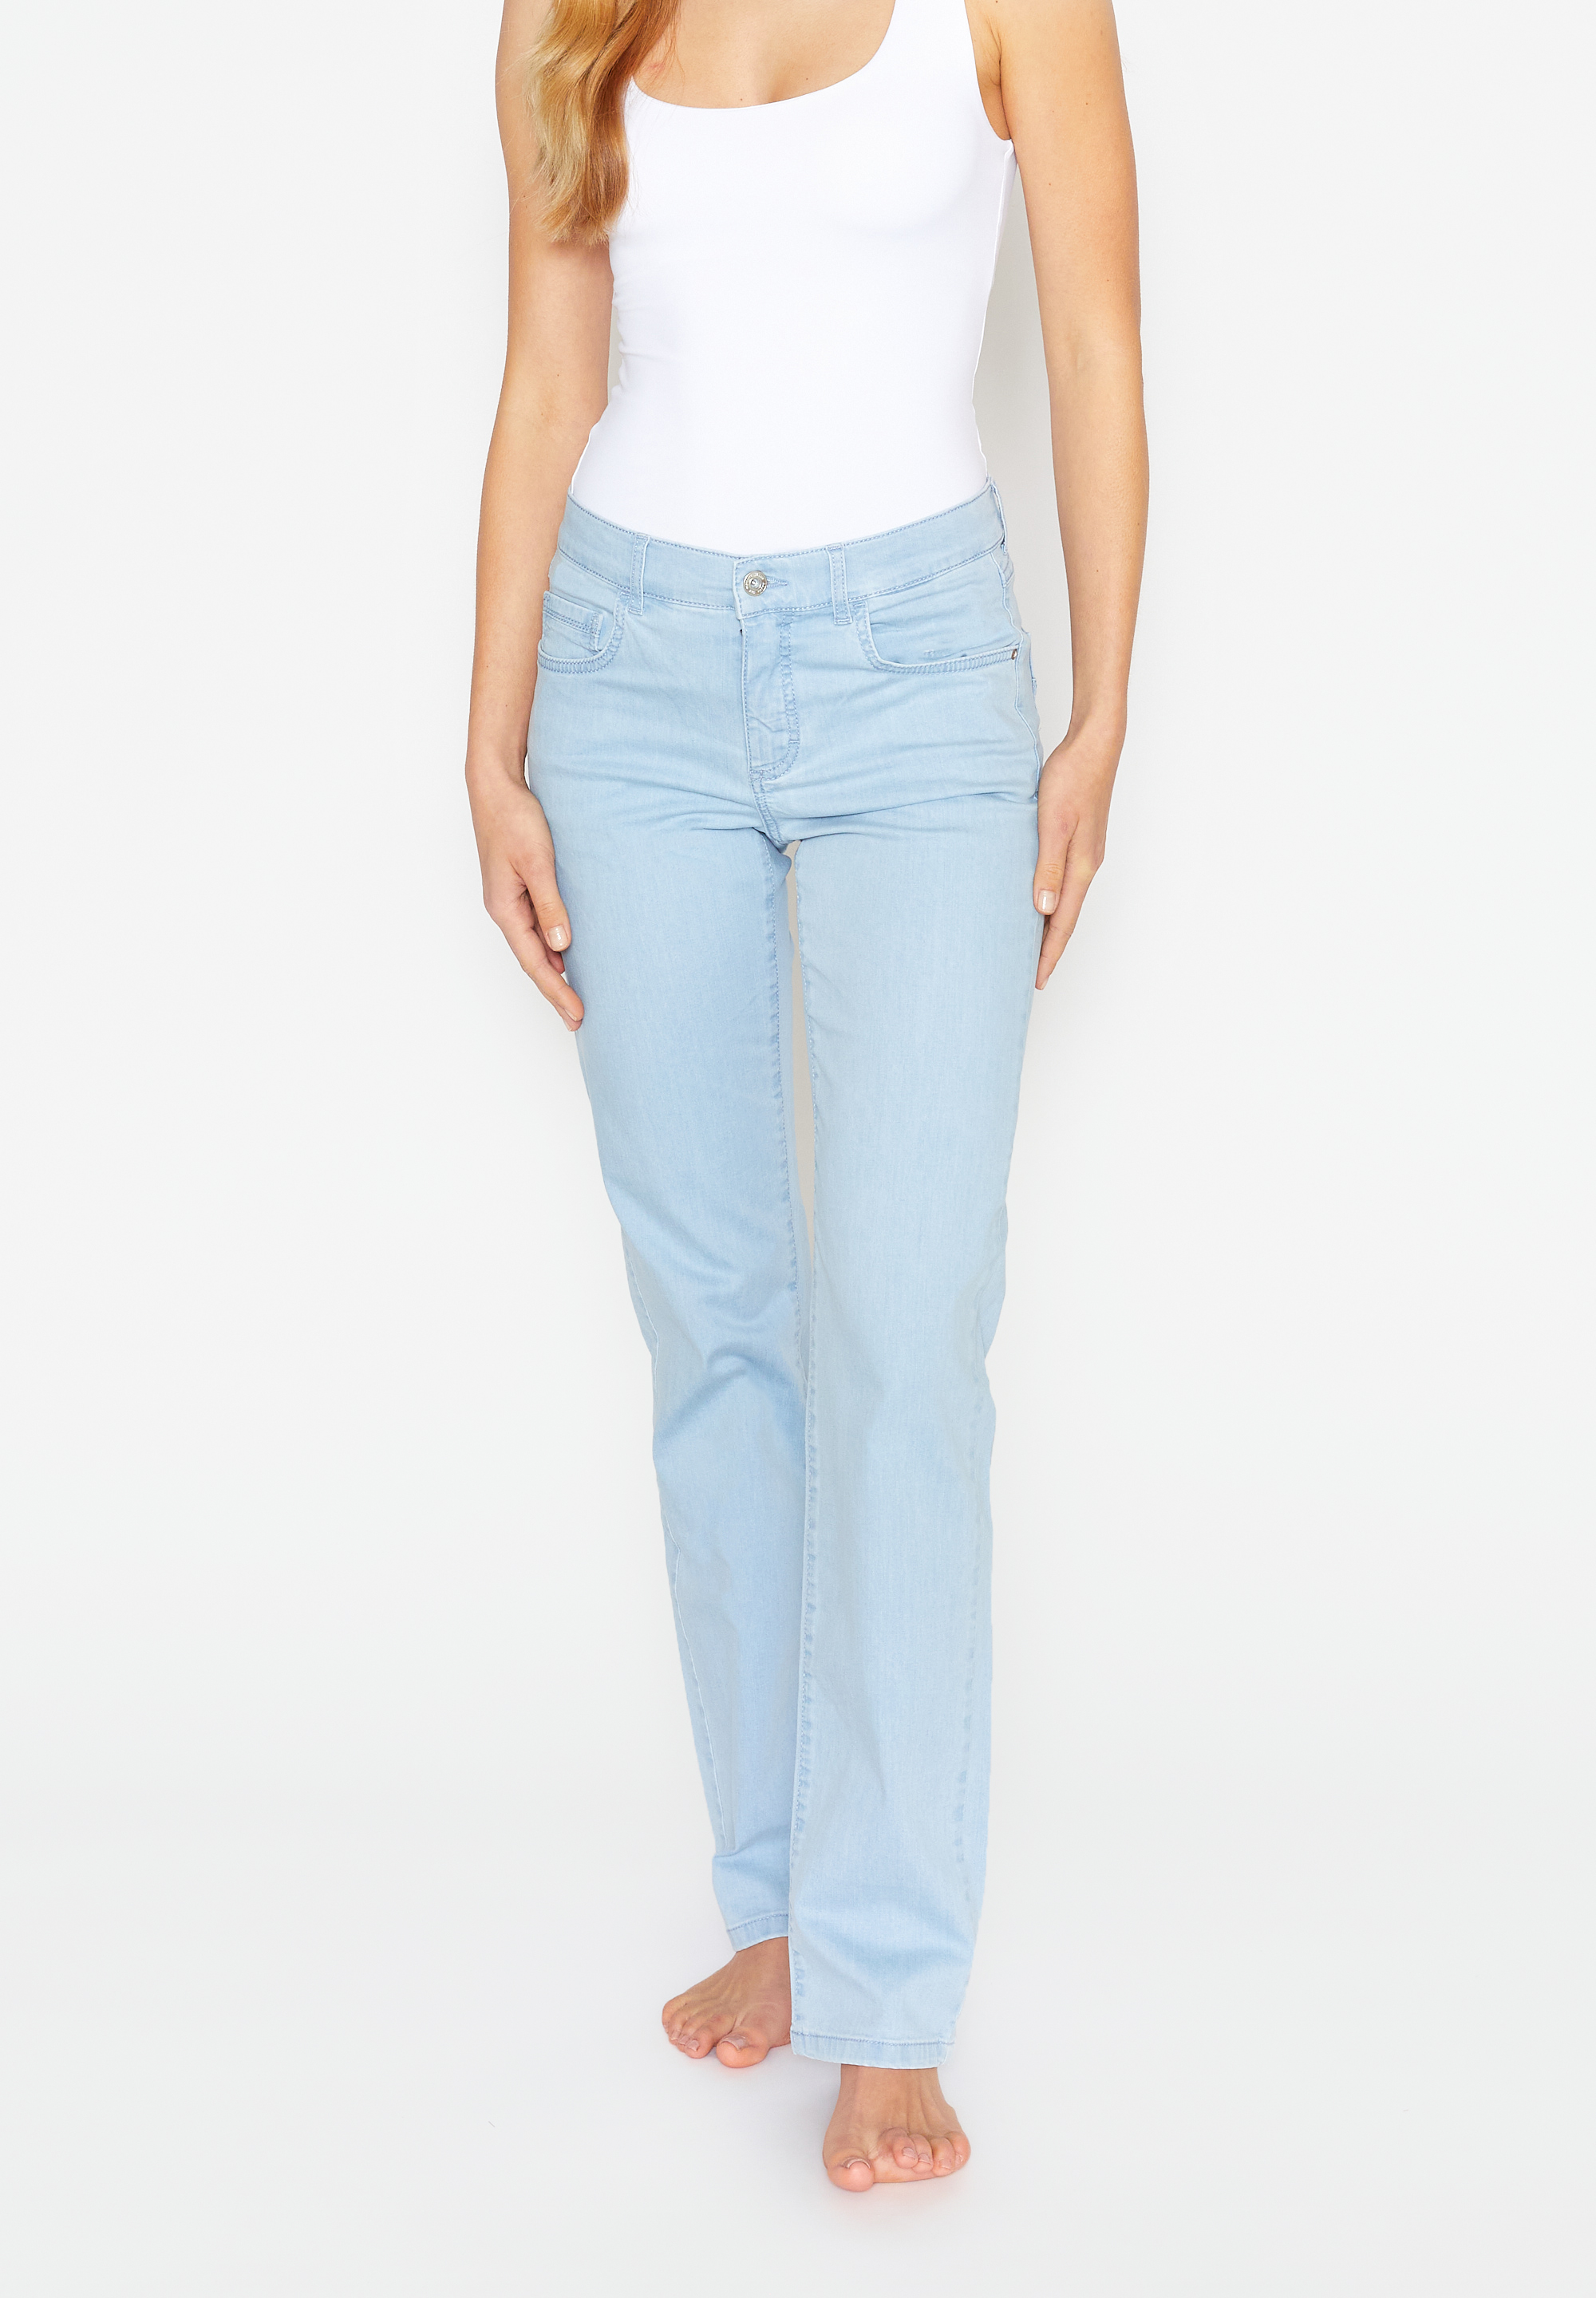 ANGELS JEANS DOLLY bleached blue 332 8000.35 - STRETCH | DENIM | Angels  Dolly | Angels Jeans | Damen Jeans | Jeans-Manufaktur